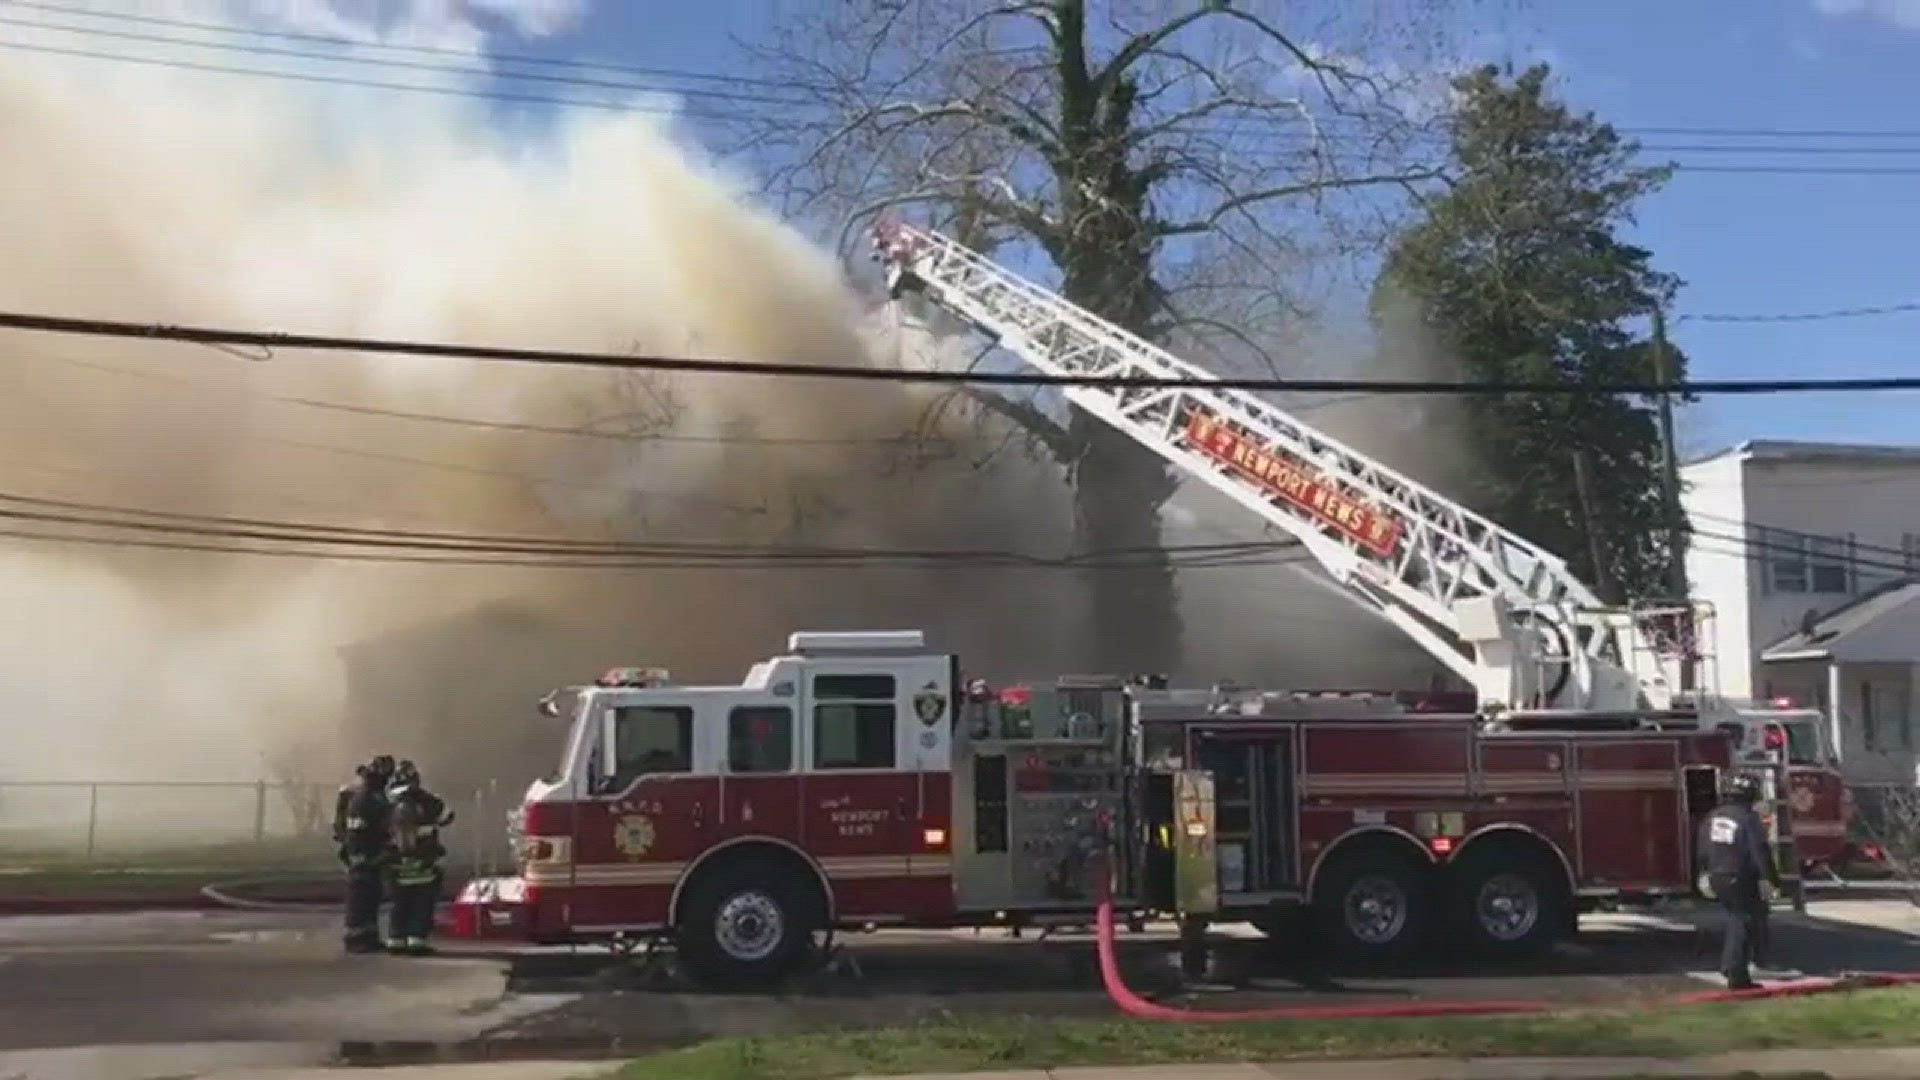 A house in Newport News was a total loss following a fire on Friday. Video courtesy 13News Now viewer Kevin.